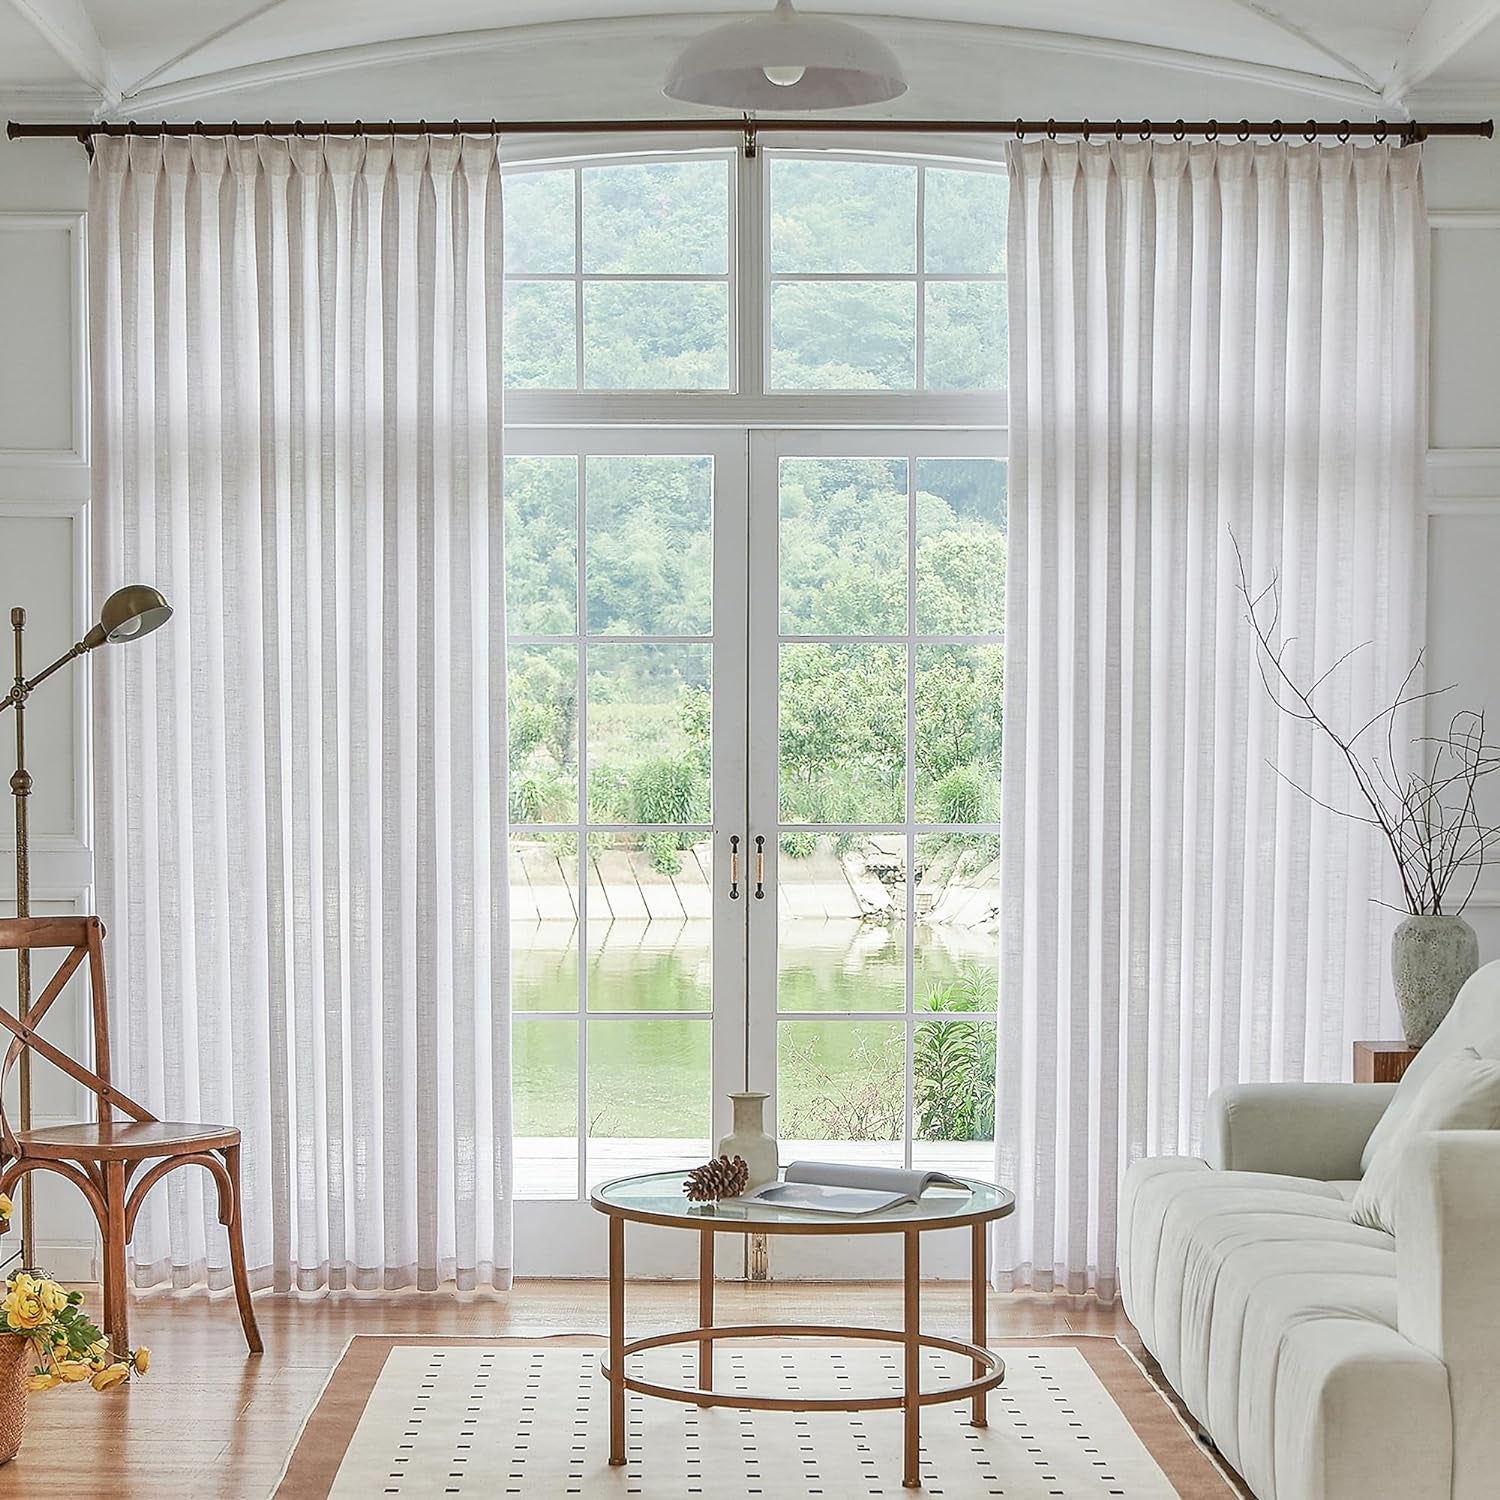 HUTO Semi Sheer Pinch Pleated Curtains 80 Inches Long for Living Room Dining Beige White Linen Textured Privacy Light Filtering Window Treatments Pinch Pleat Curtain Drapes for Bedroom, 54" W,1 Panel  HUTO 2 54"W X 84"L 